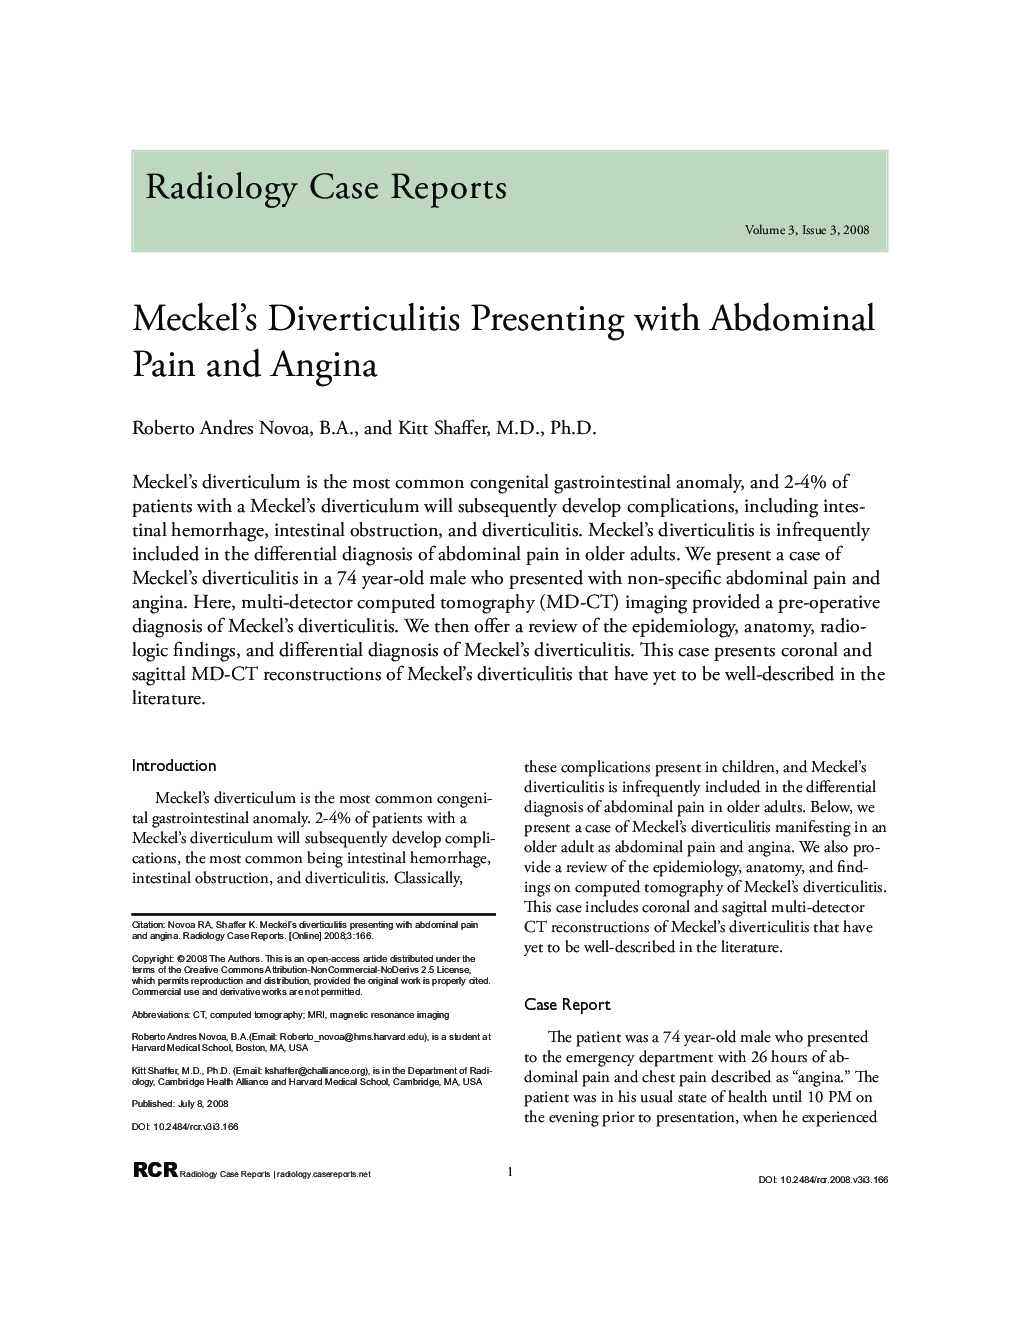 Meckel's Diverticulitis Presenting with Abdominal Pain and Angina